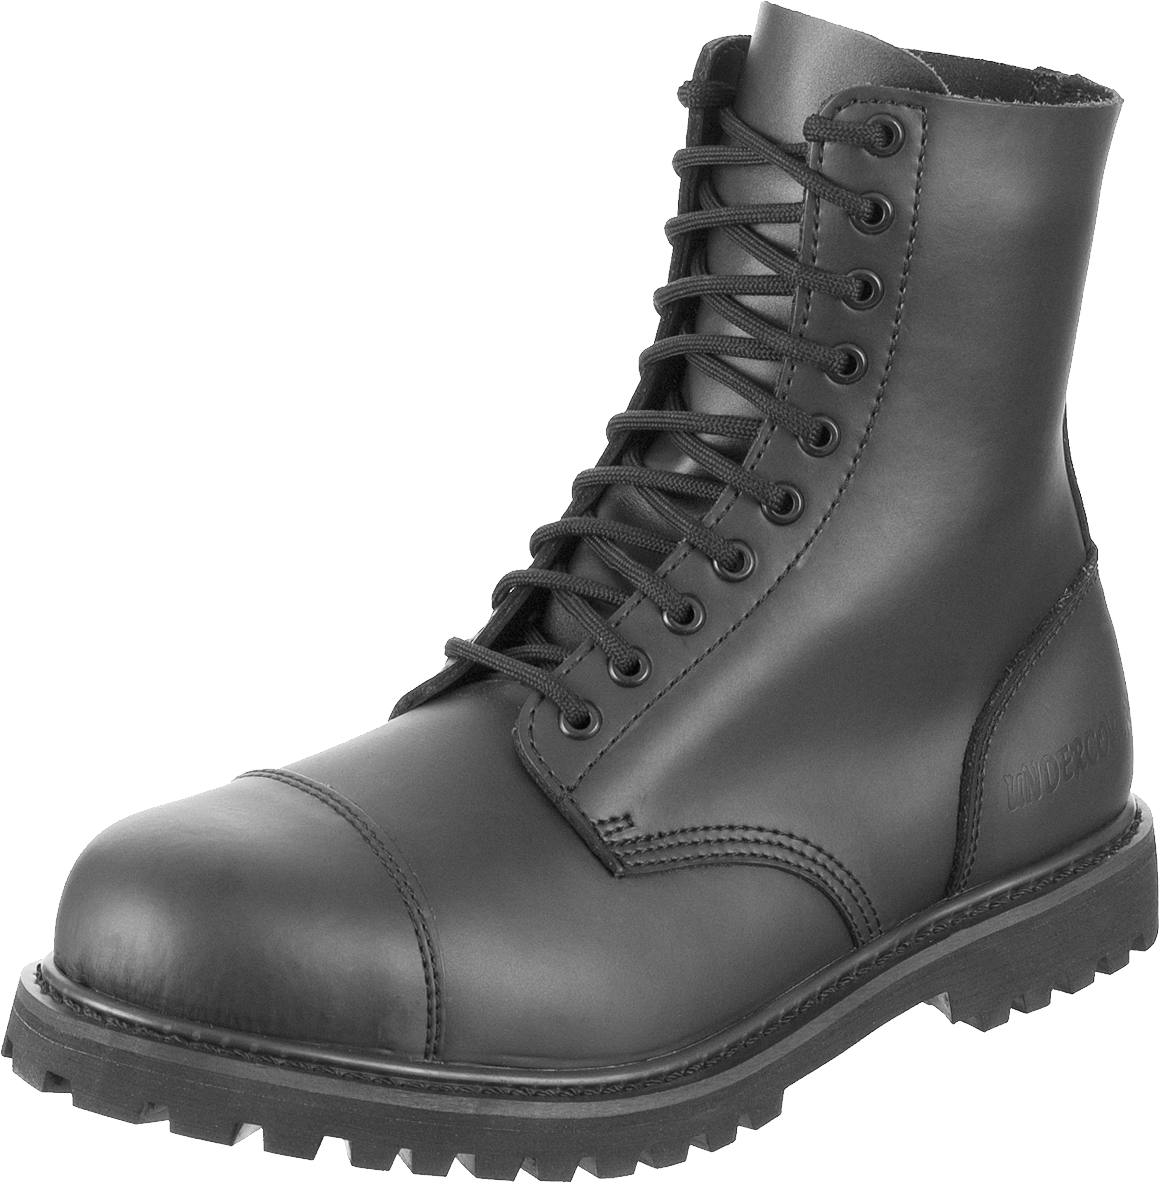 Black army Boots